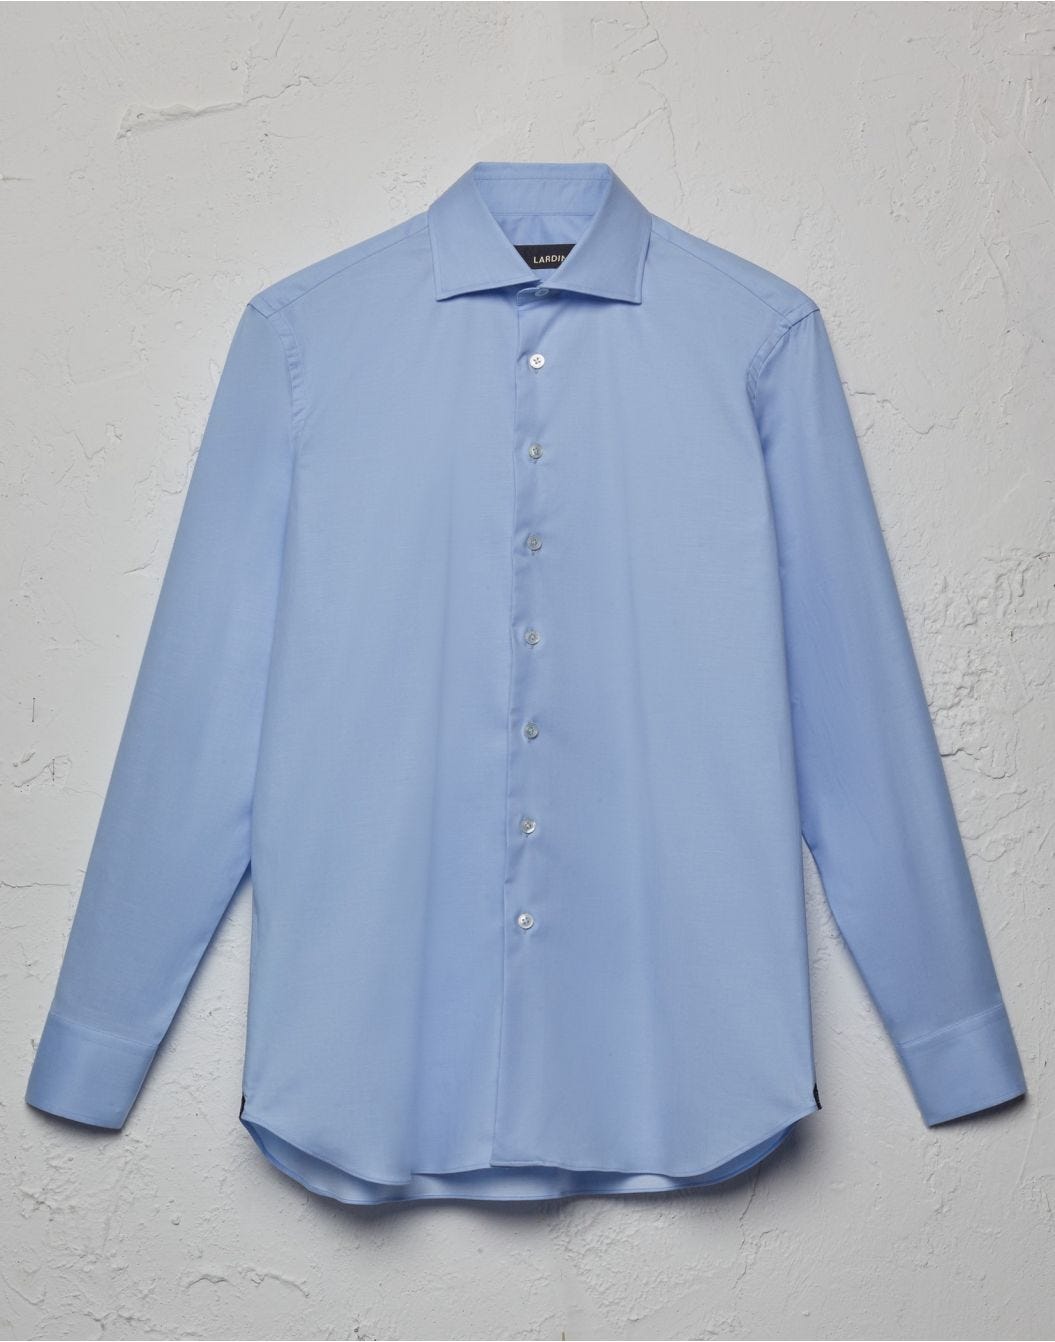 Stainproof stretch cotton shirt